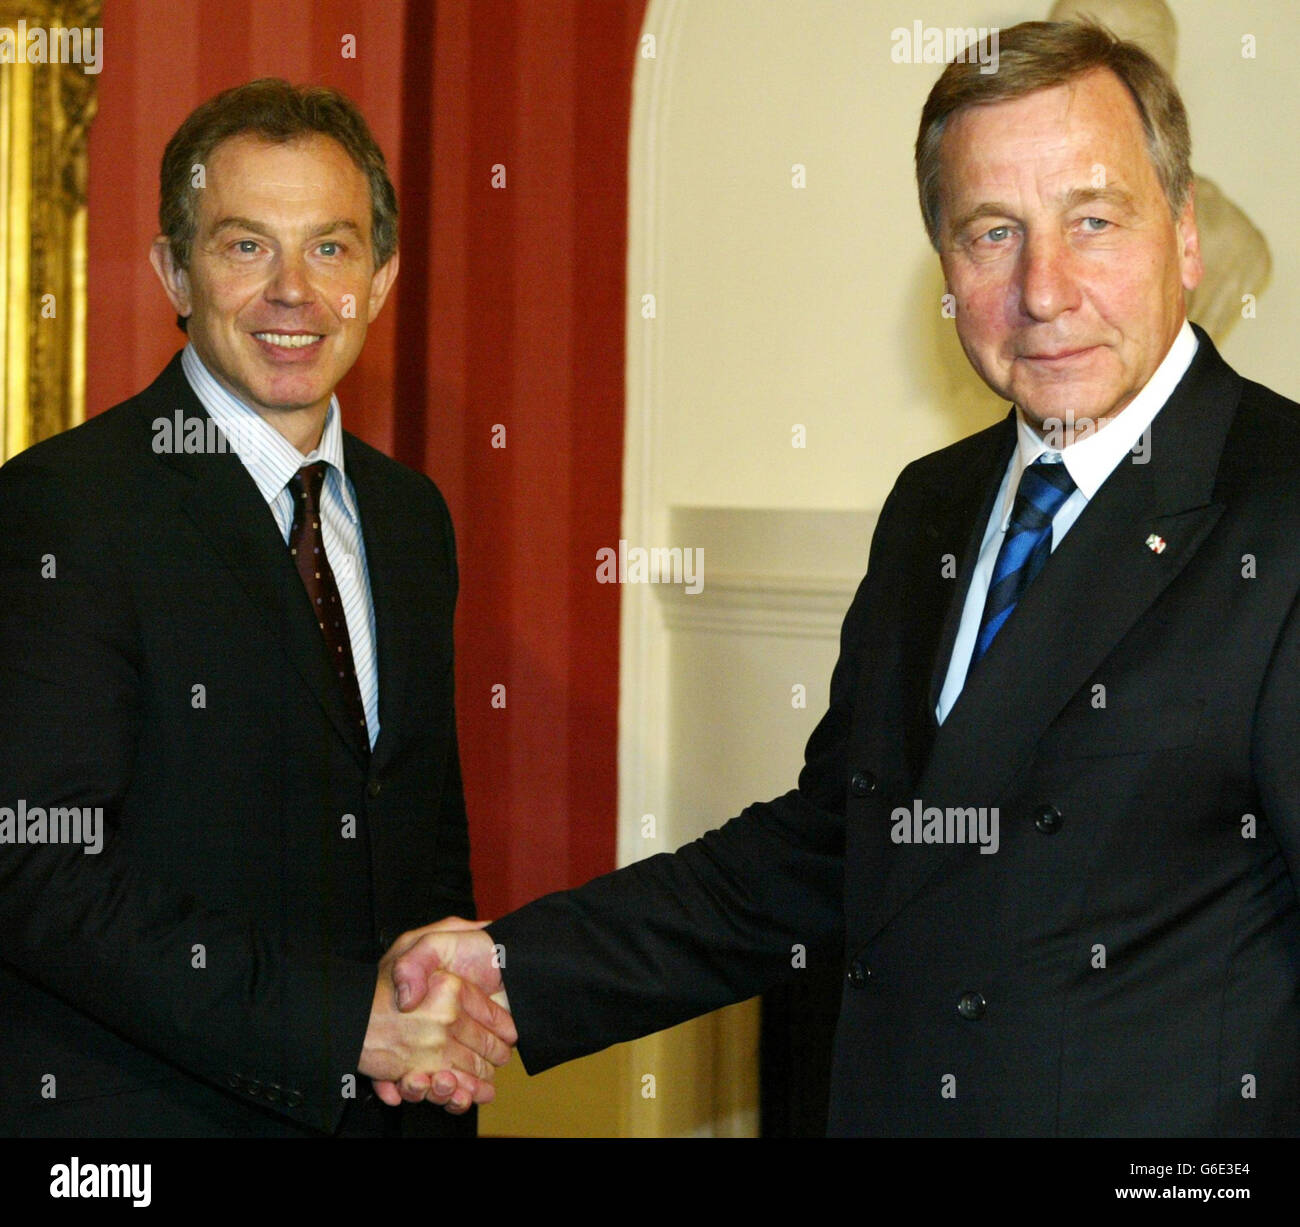 Prime Minister Tony Blair (left) meets Germany's Economics Minister Wolfgang Clement, in Downing Street, London. Stock Photo